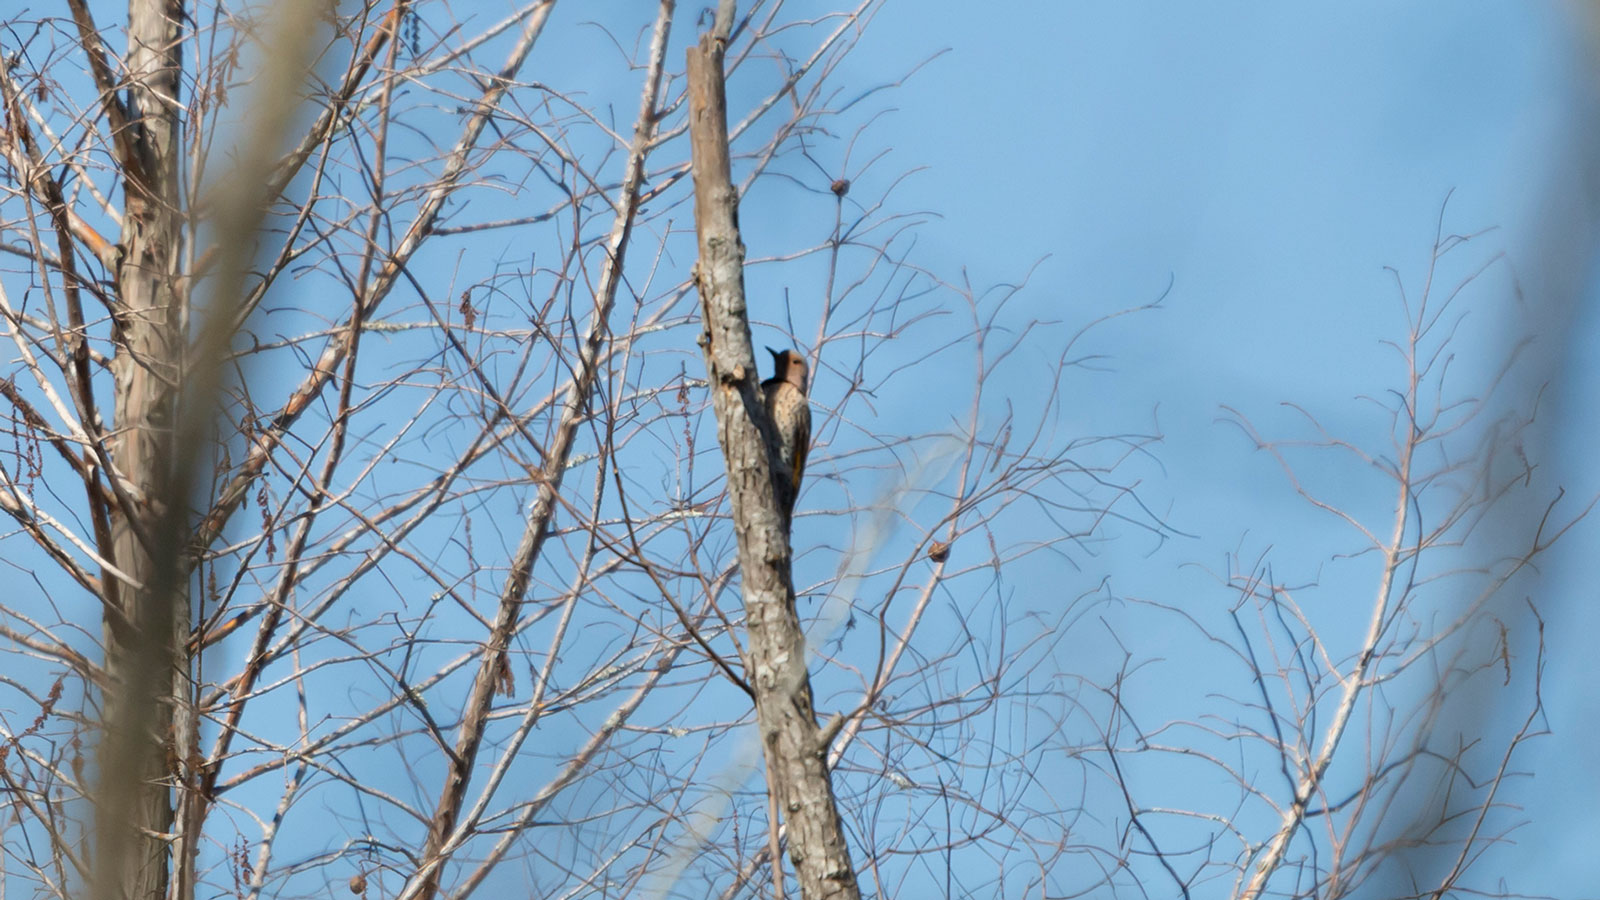 Northern flicker drilling into a tree